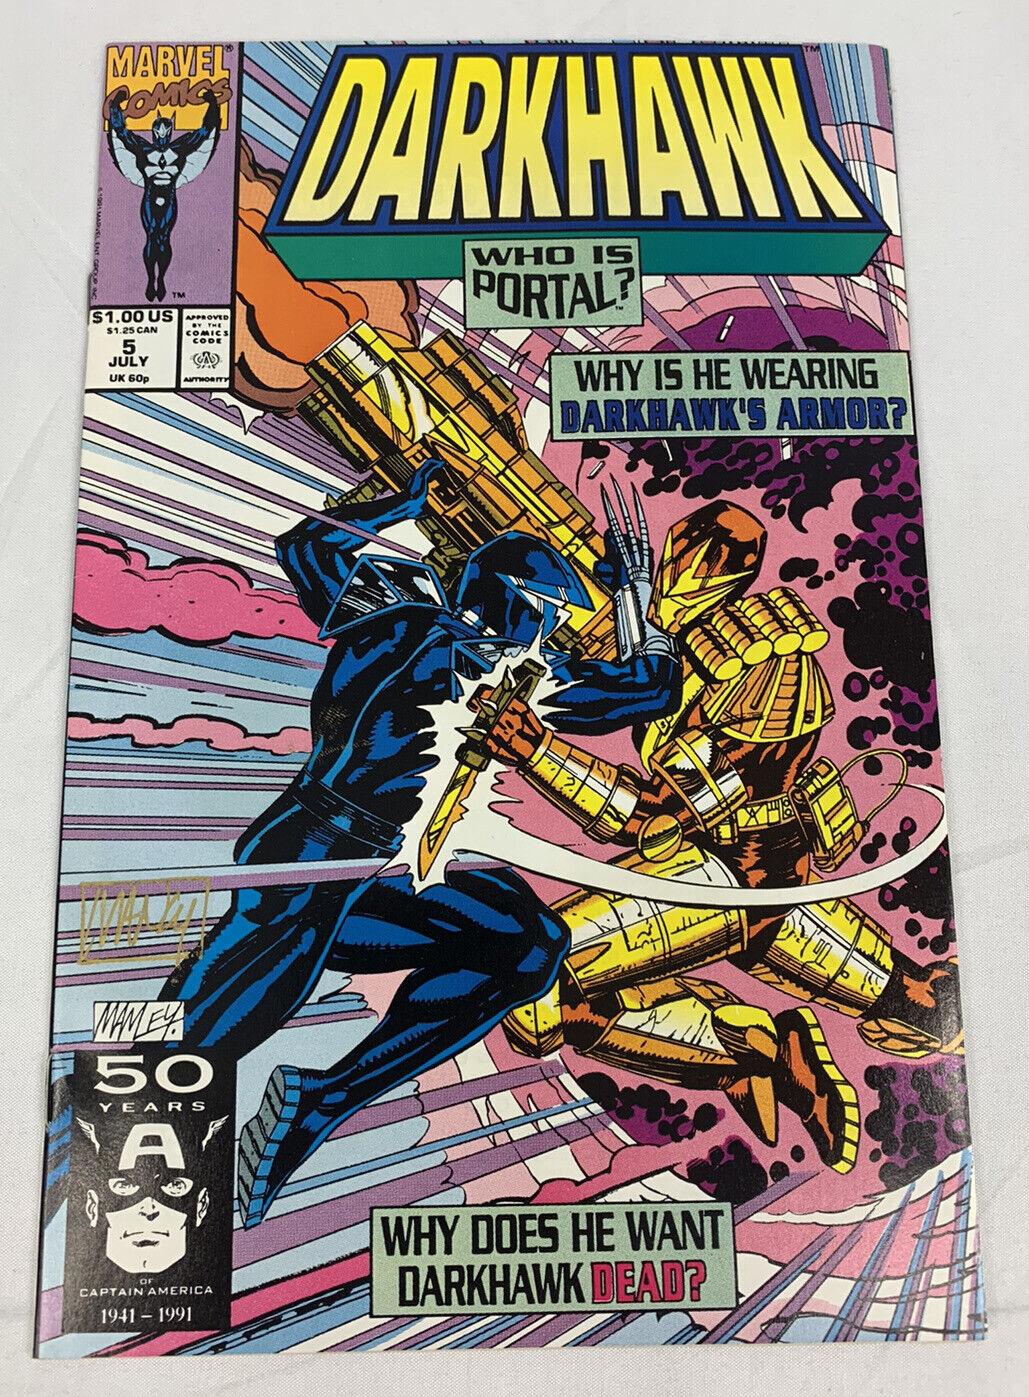 Darkhawk #5 - Signed By Mike Manley - Marvel Comics - Excellent Condition - 1991